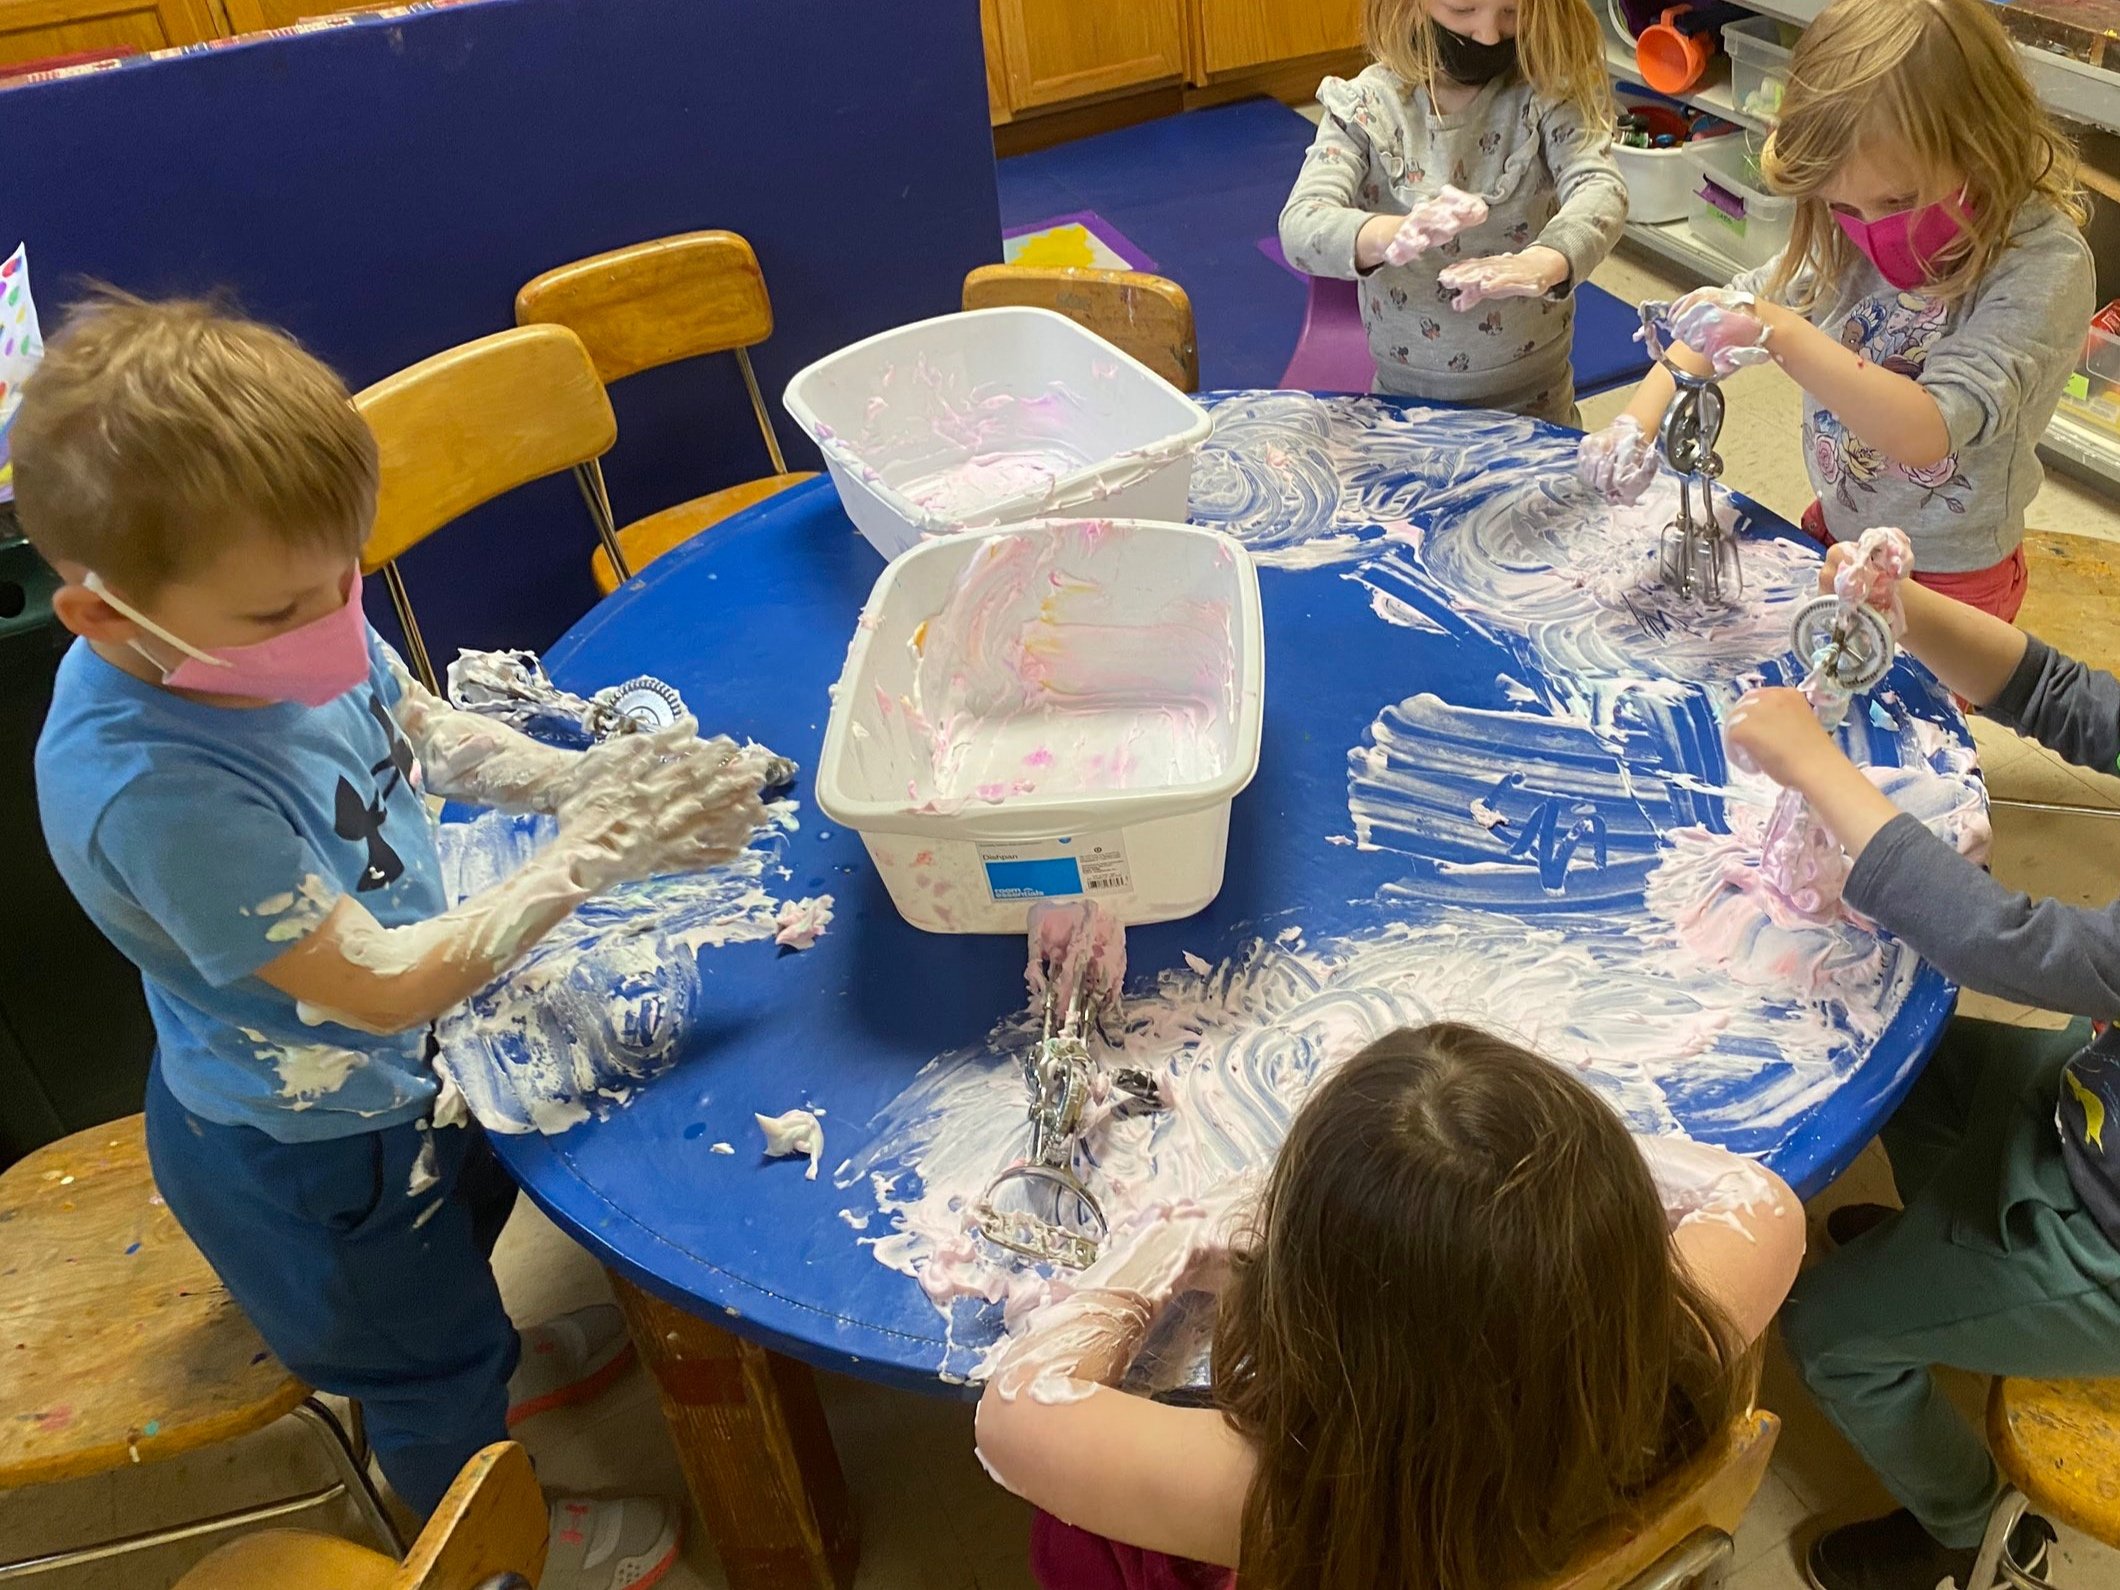 It's ok to get a little messy at school!